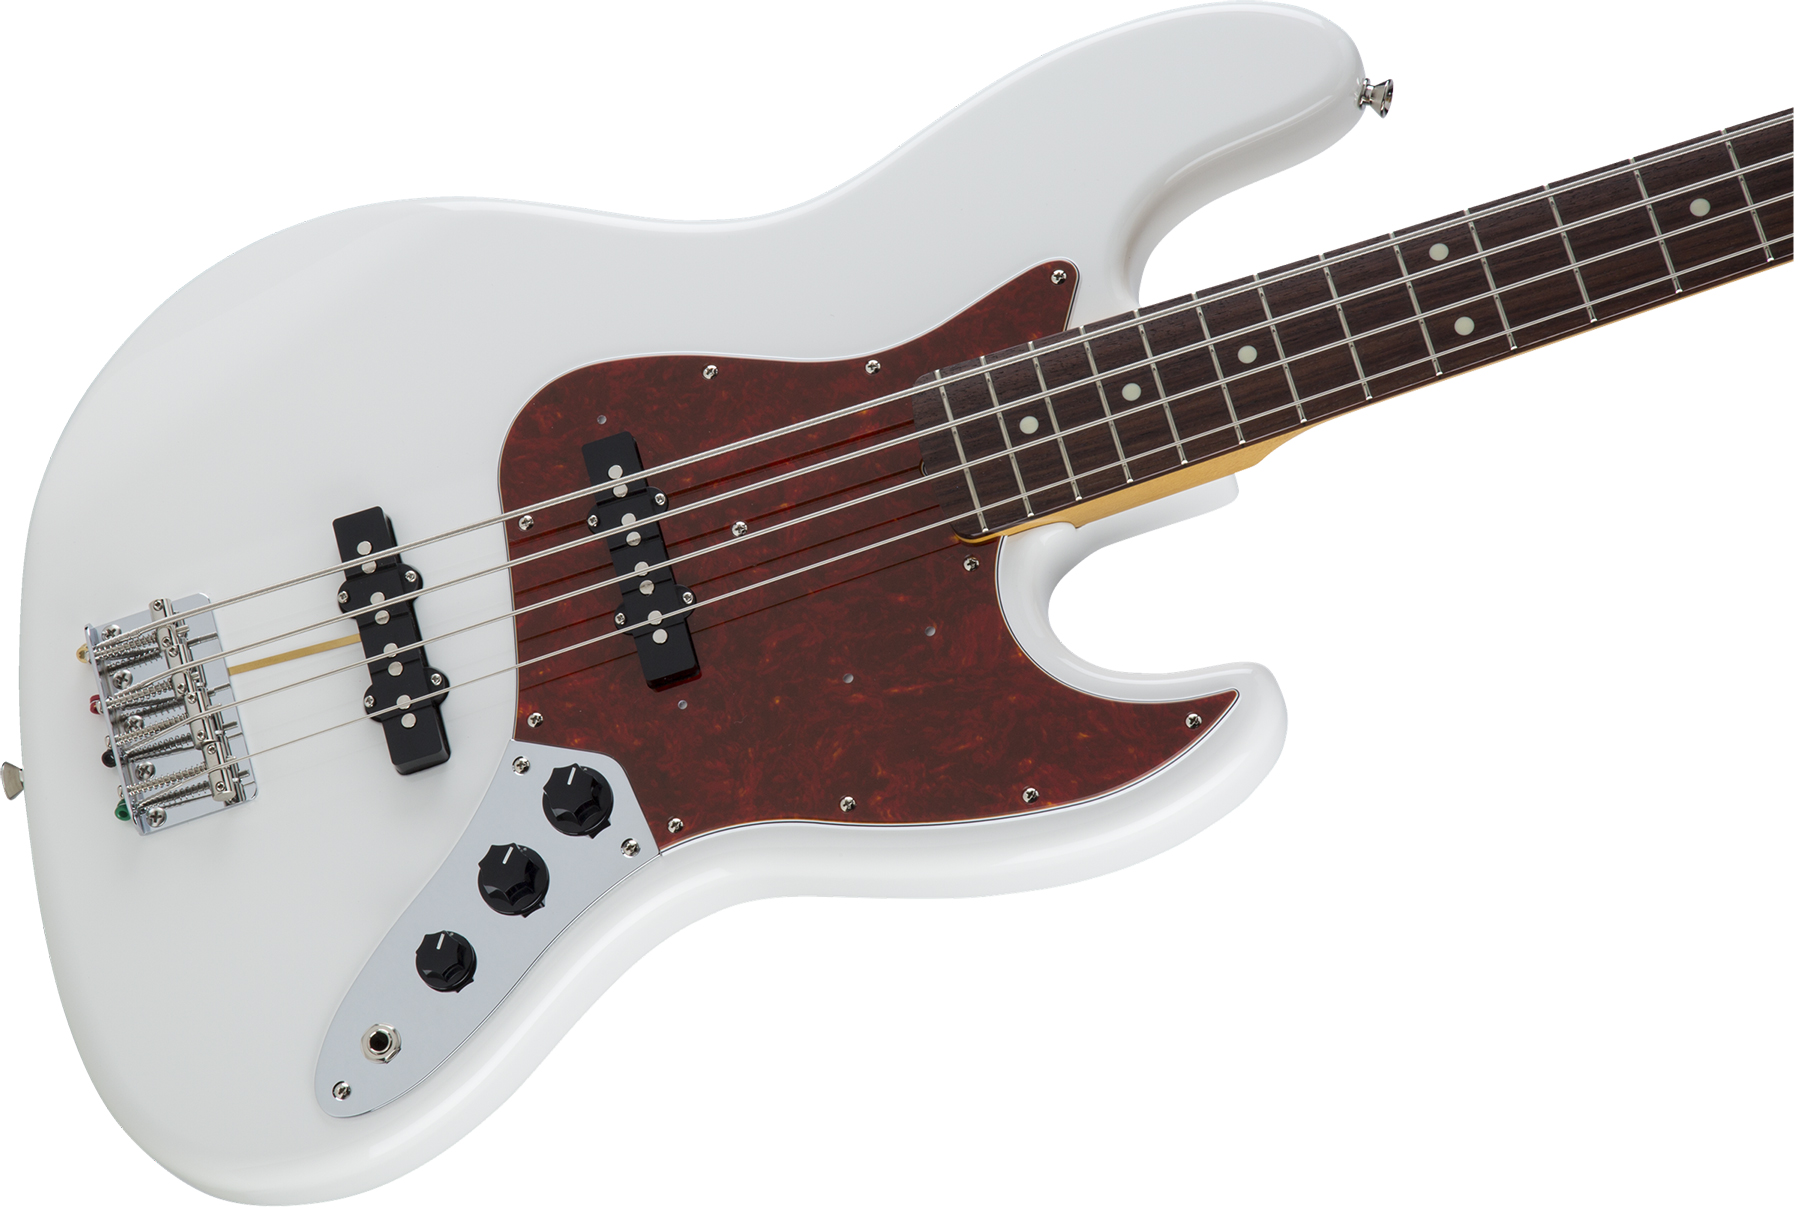 Fender Jazz Bass Traditional Ii 60s Jap 2s Trem Rw - Olympic White - Solid body electric bass - Variation 2